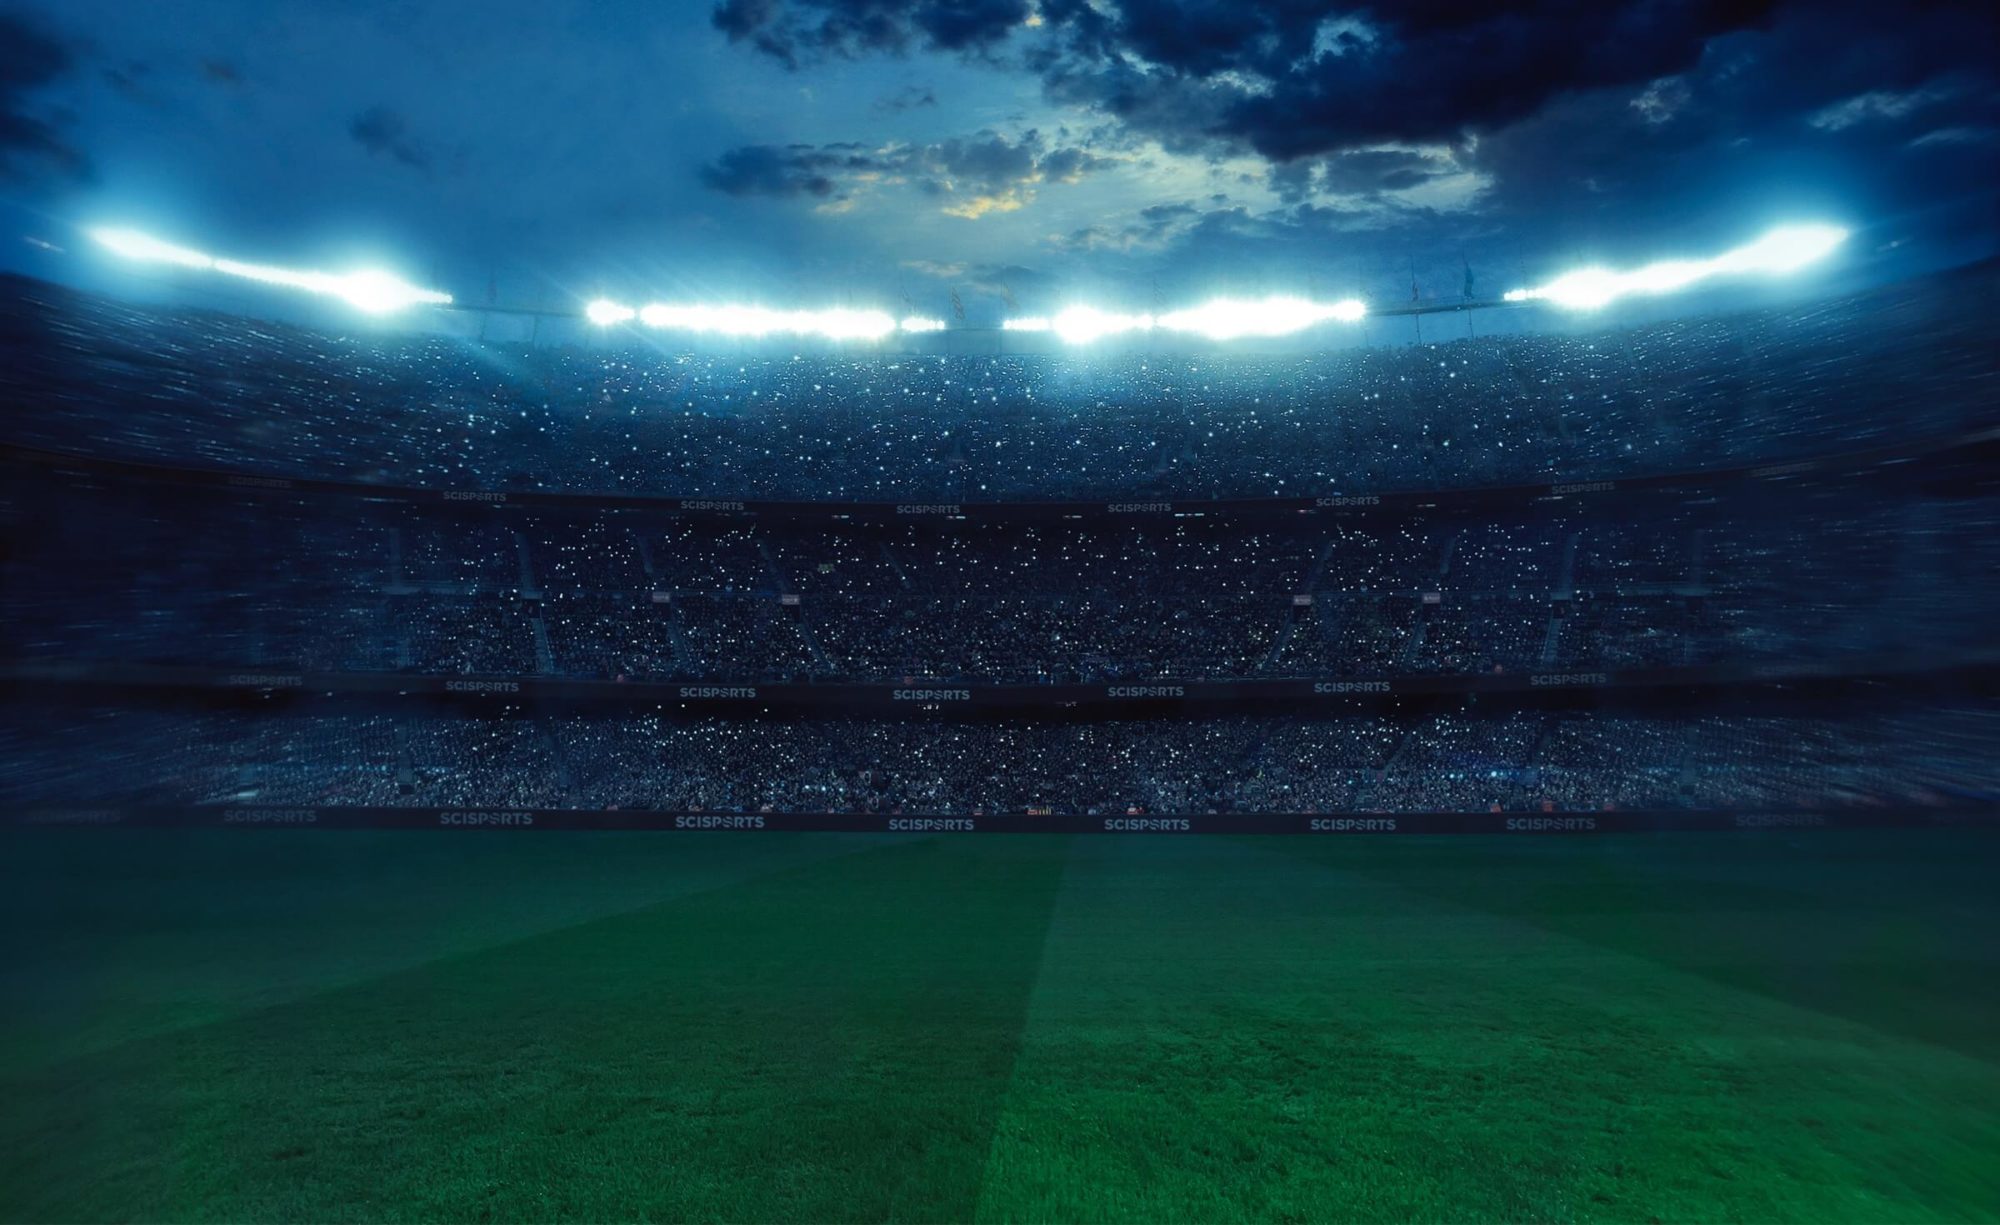 Visualisation of a football stadium at night in SciSports style used as background